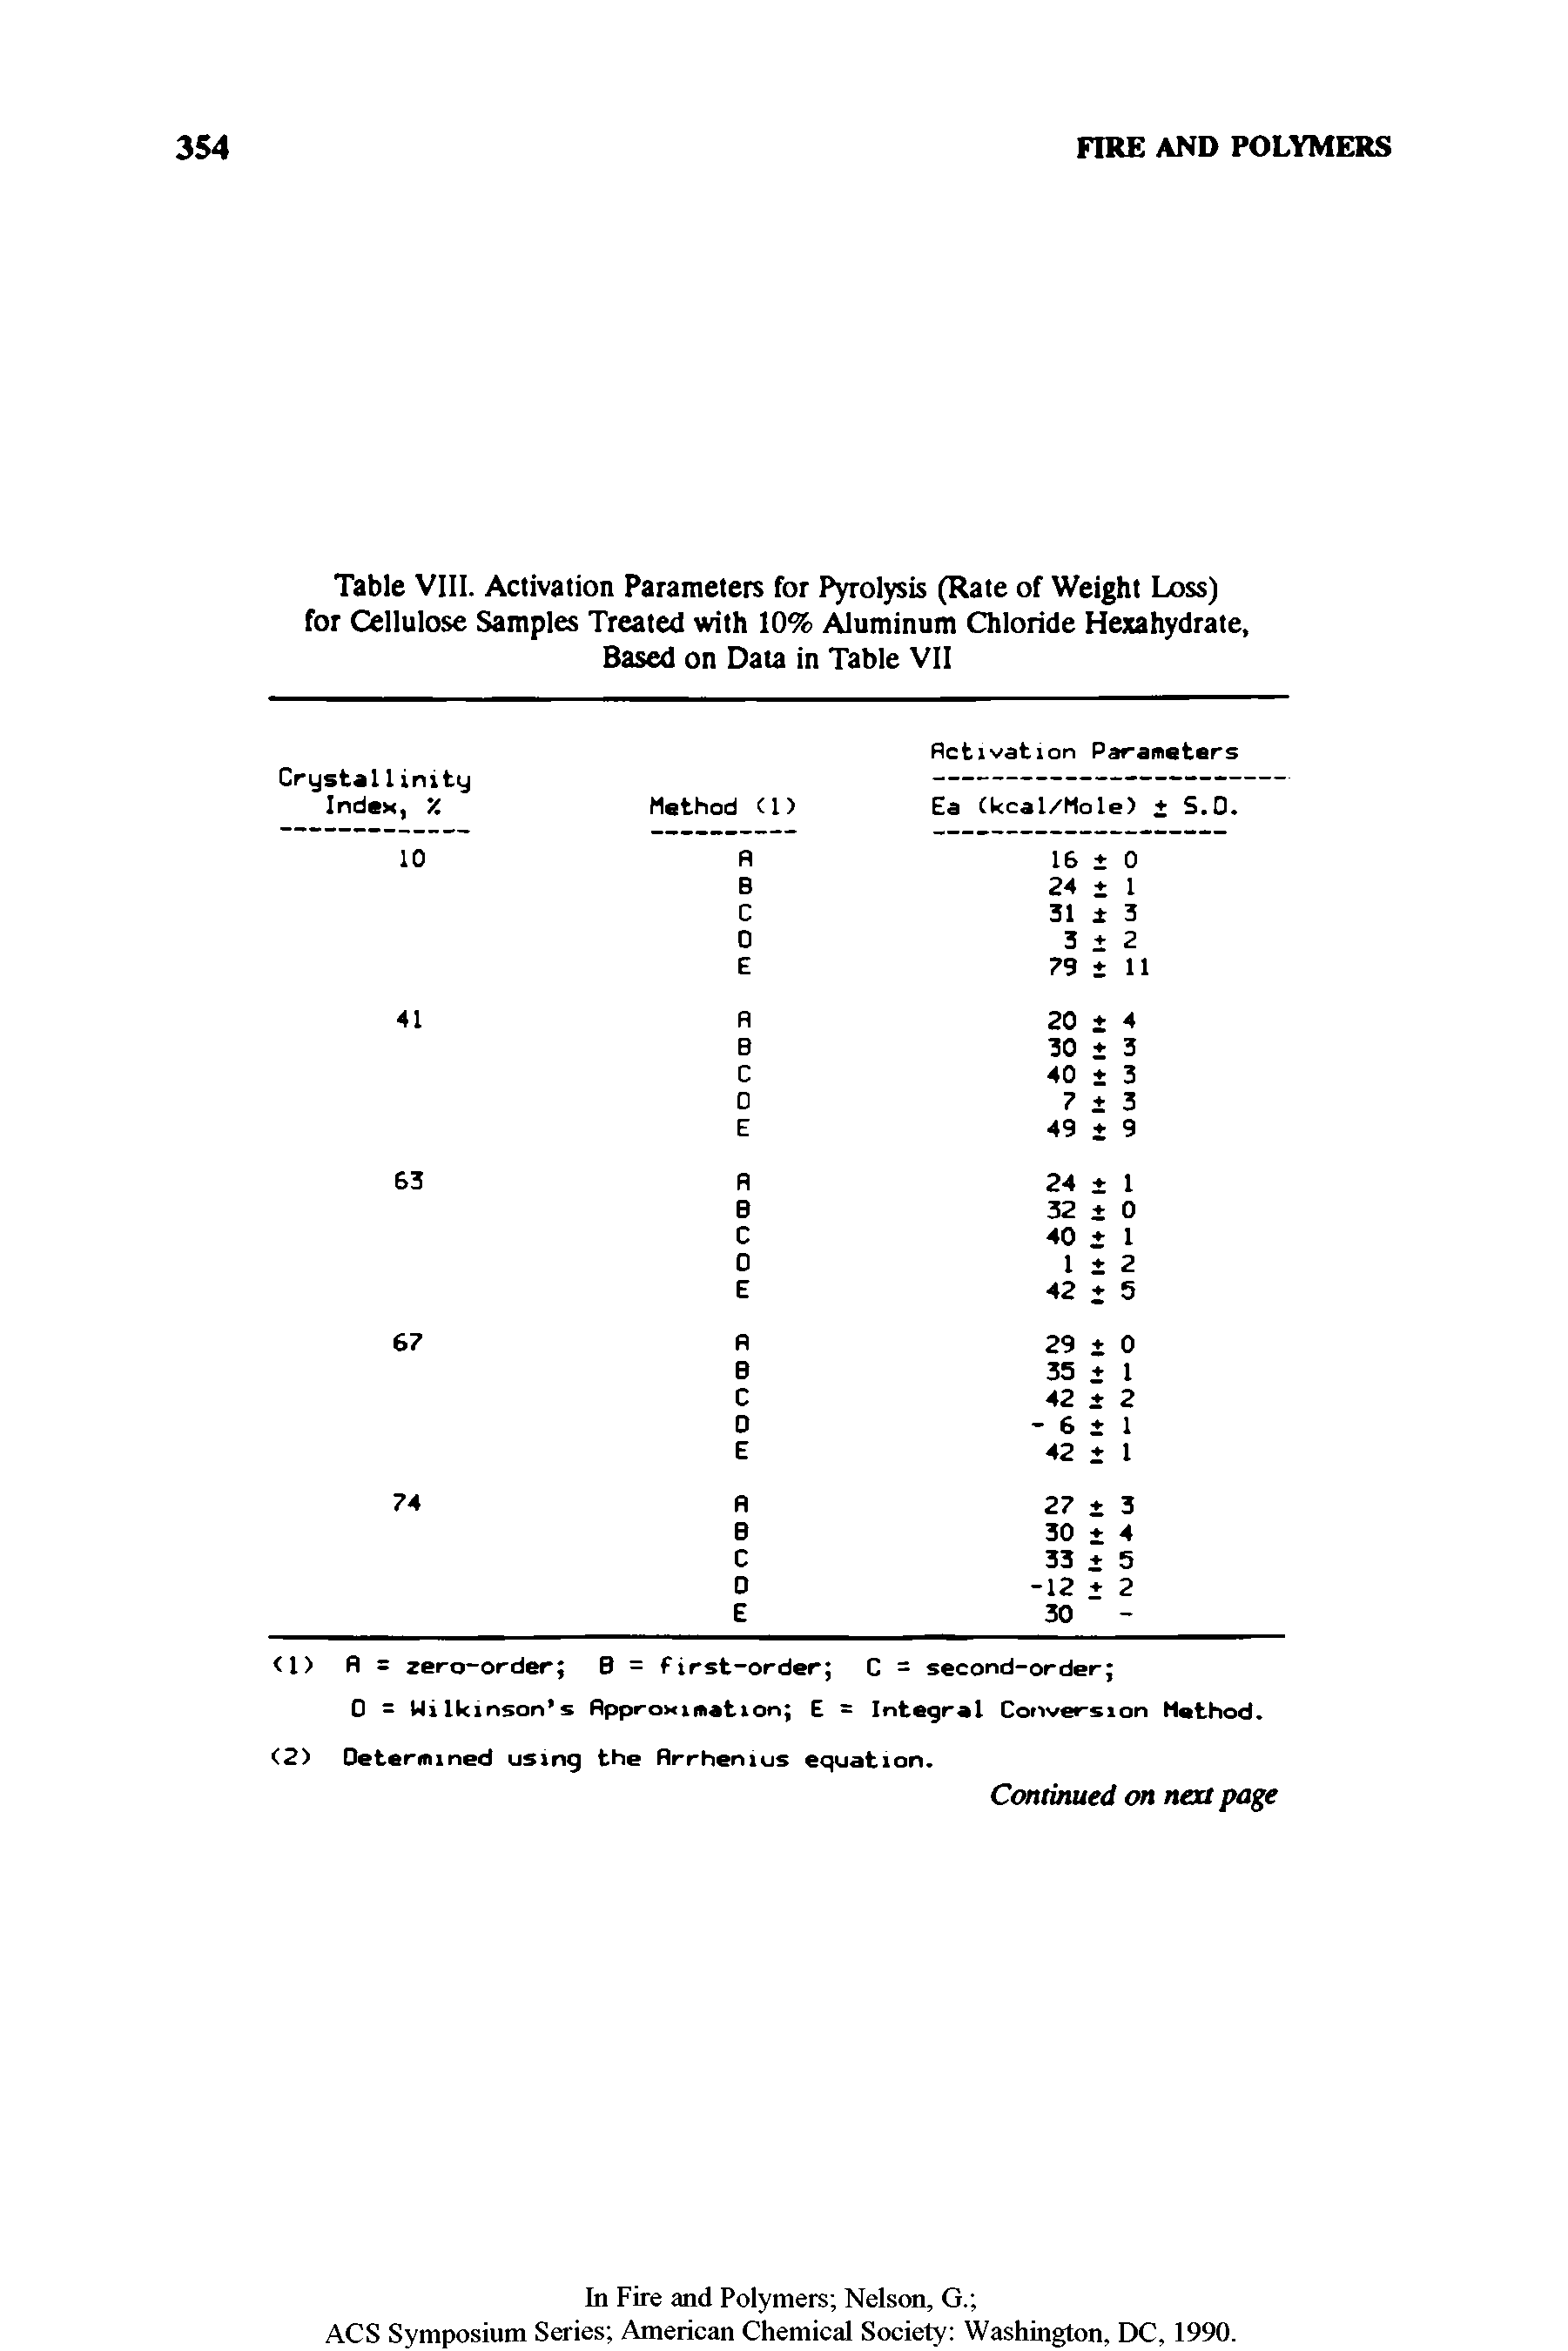 Table VIII. Activation Parameters for Pyrolysis (Rate of Weight Loss) for Cellulose Samples Treated with 10% Aluminum Chloride Hexahydrate, Based on Data in Table VII...